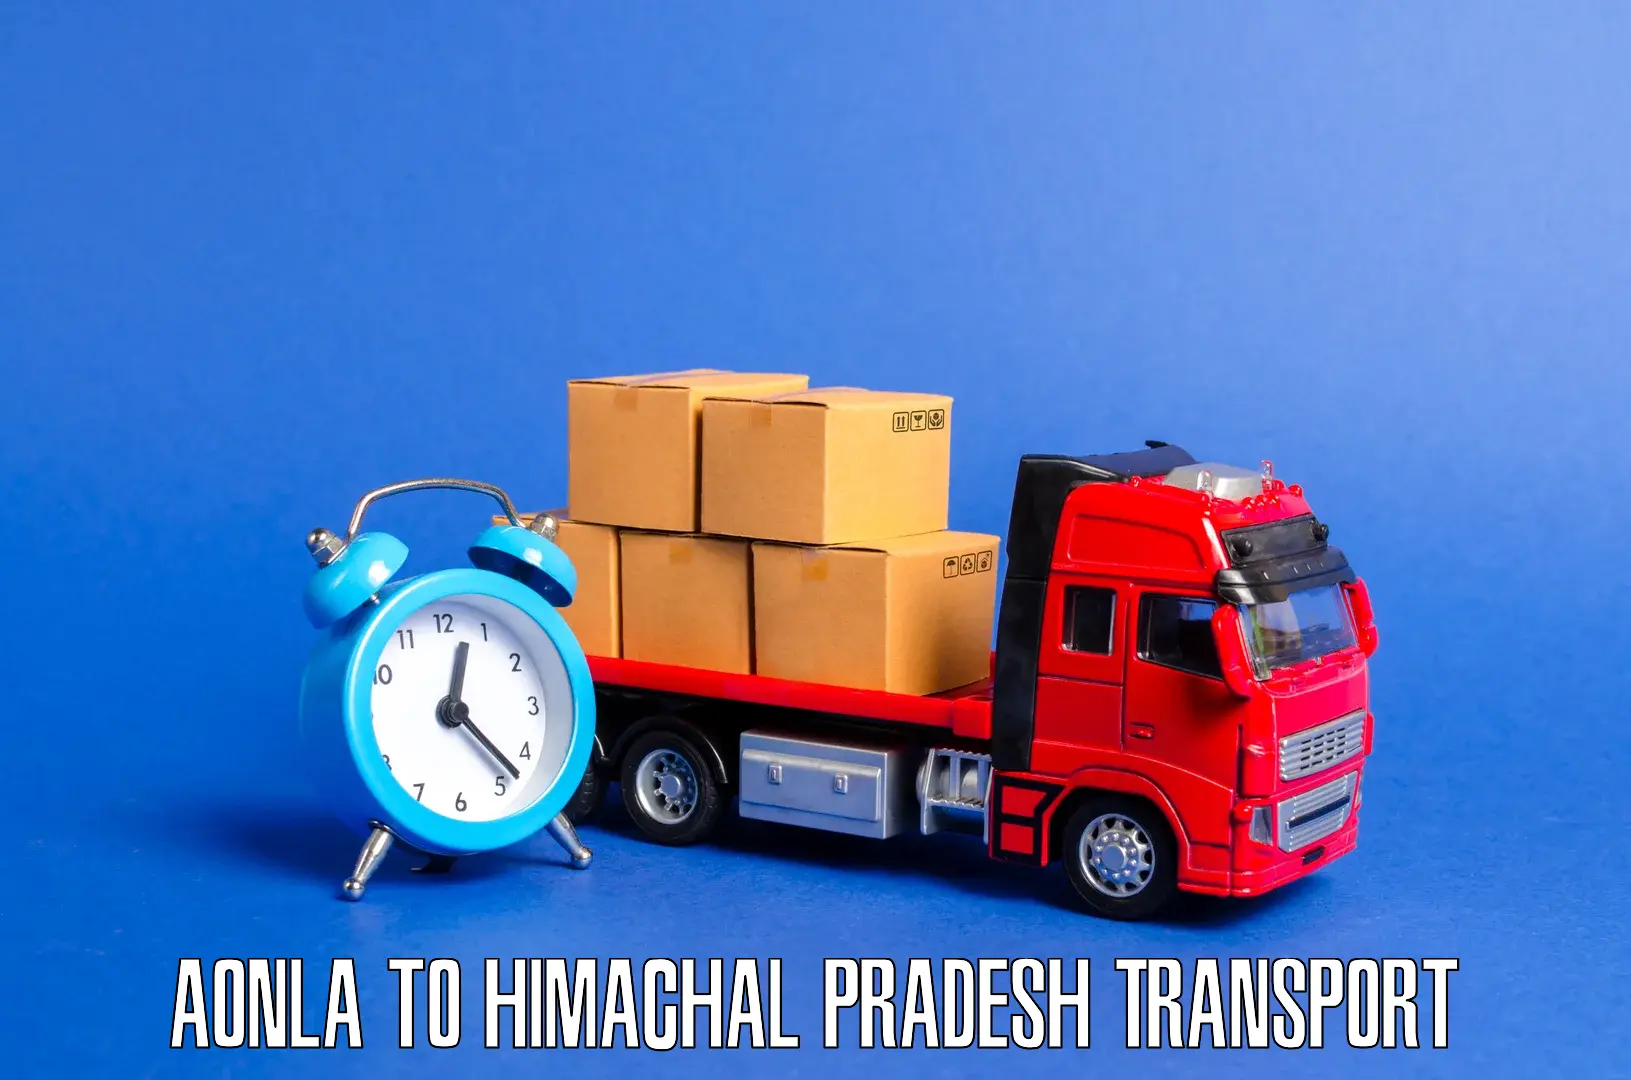 Daily parcel service transport Aonla to Chopal